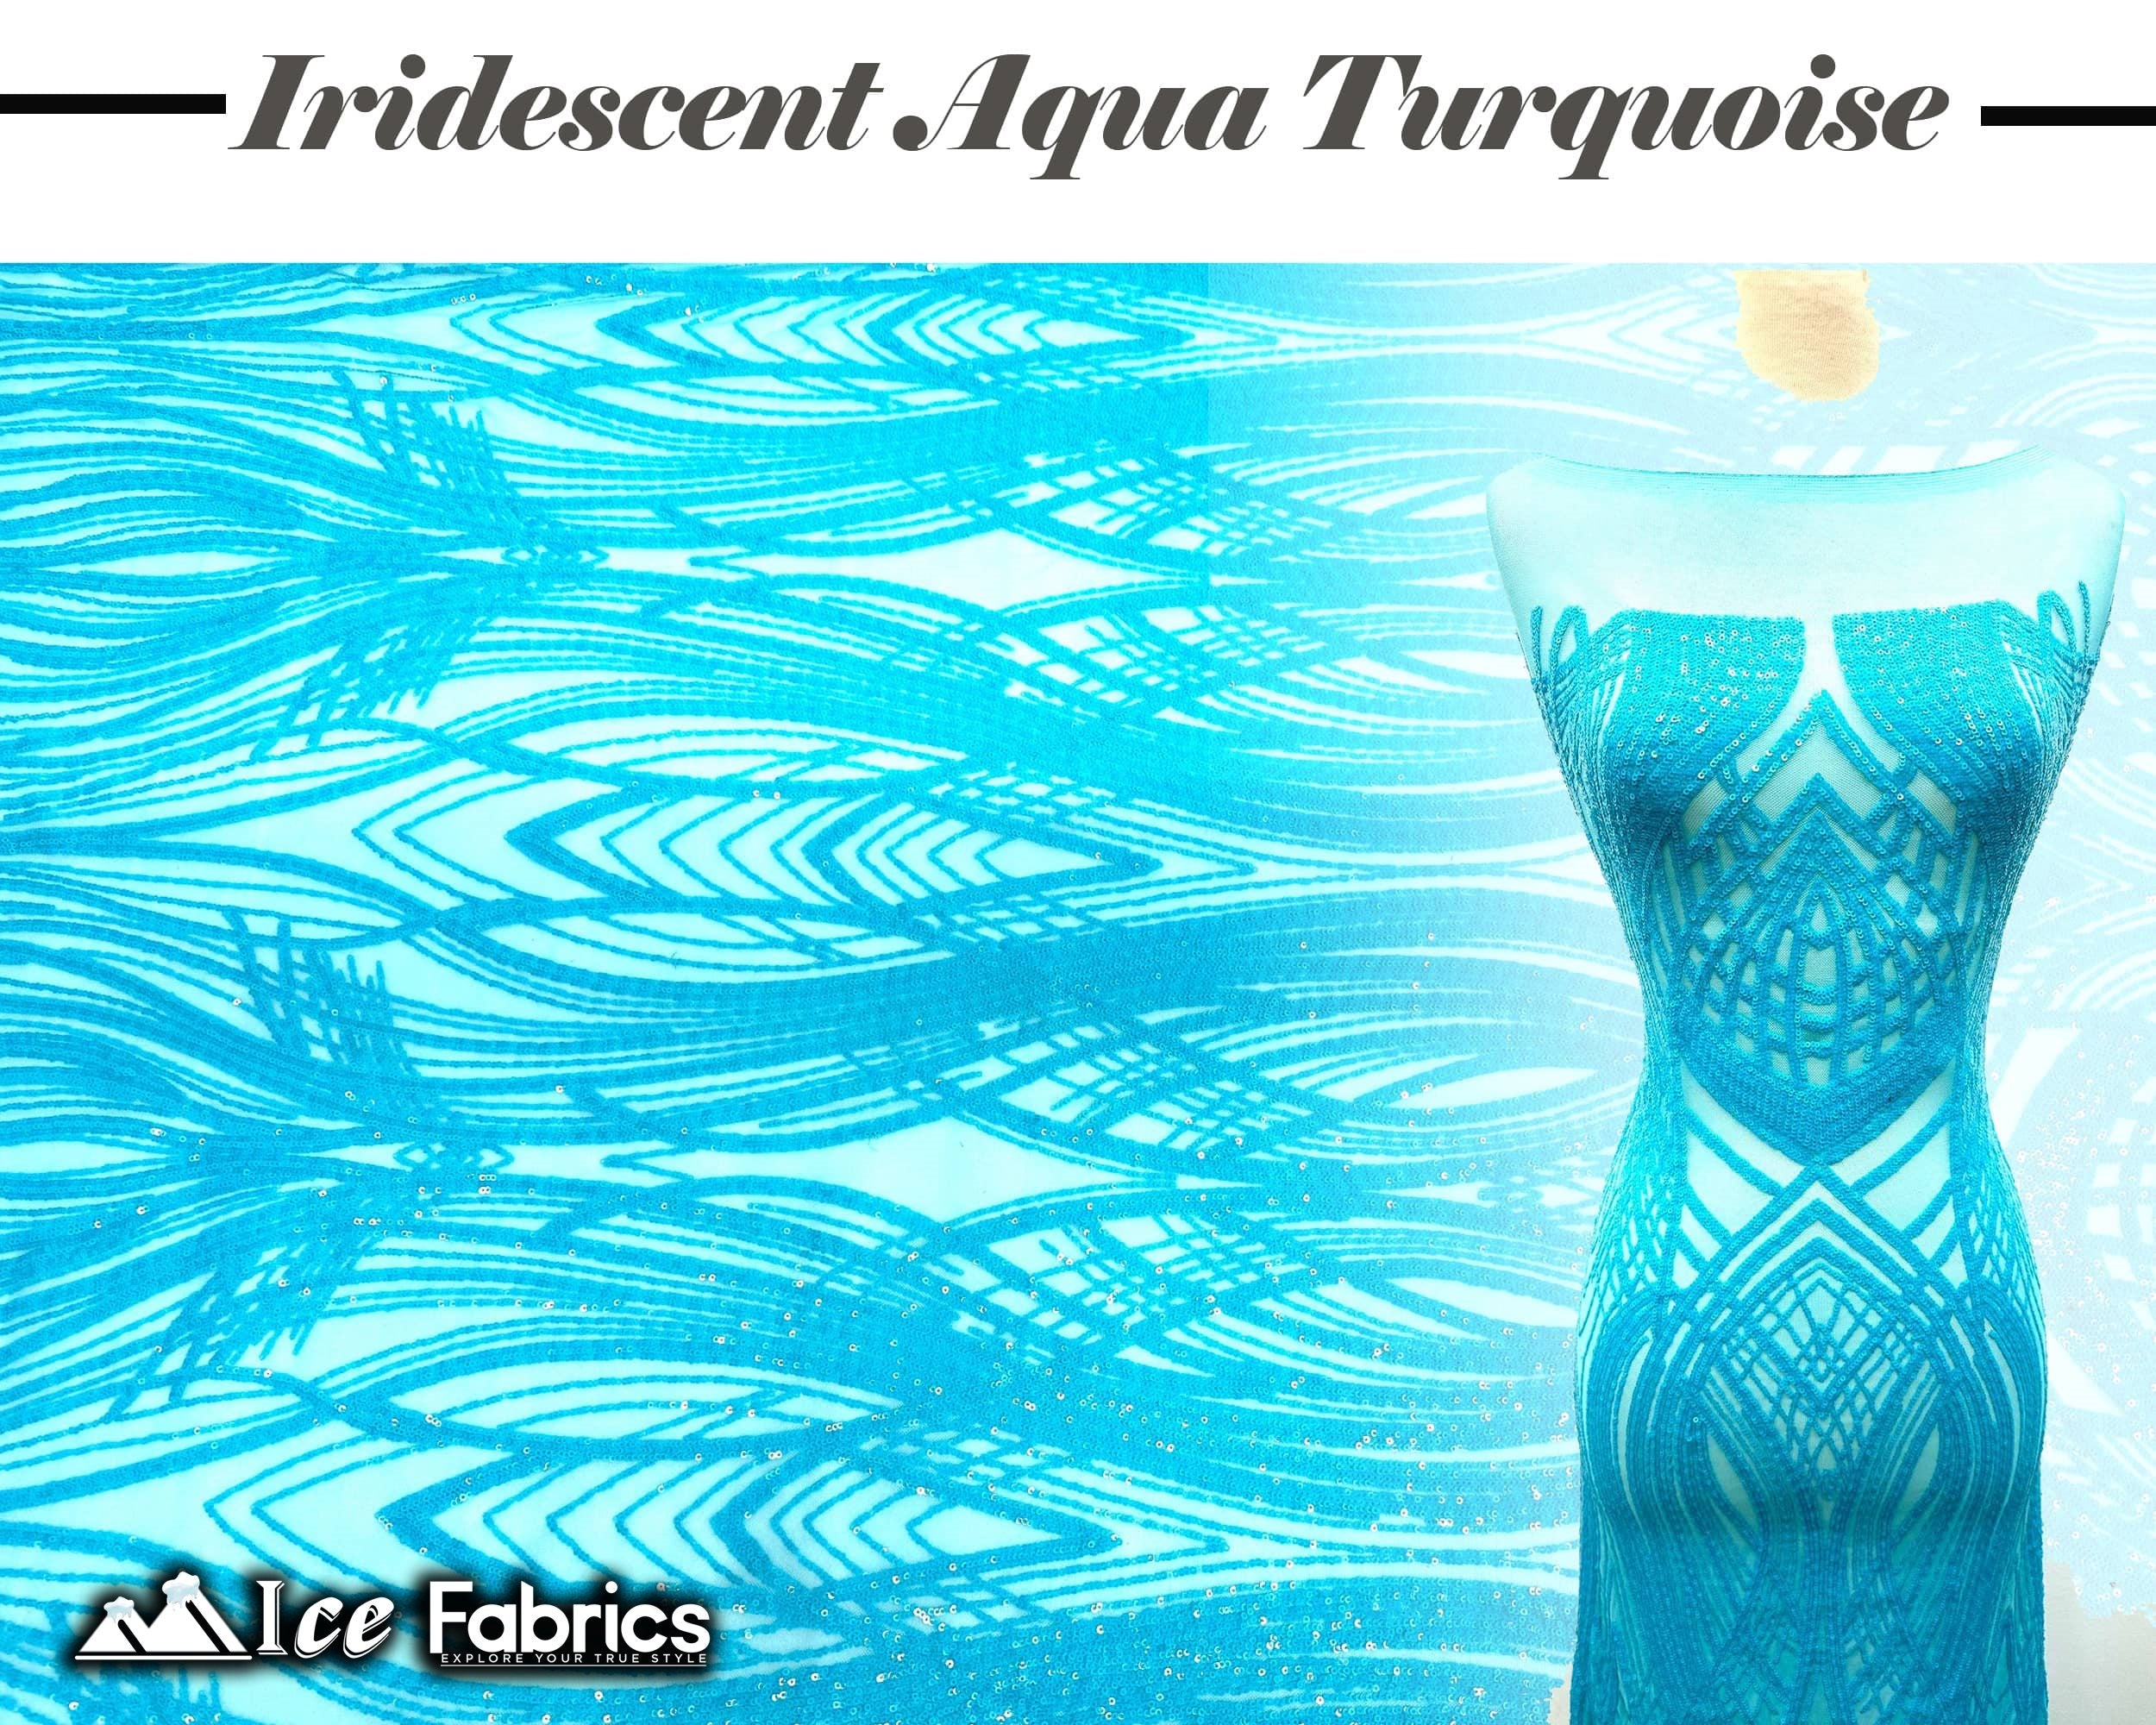 Peacock Sequin Fabric By The Yard 4 Way Stretch Spandex ICE FABRICS Iridescent Aqua Turquoise